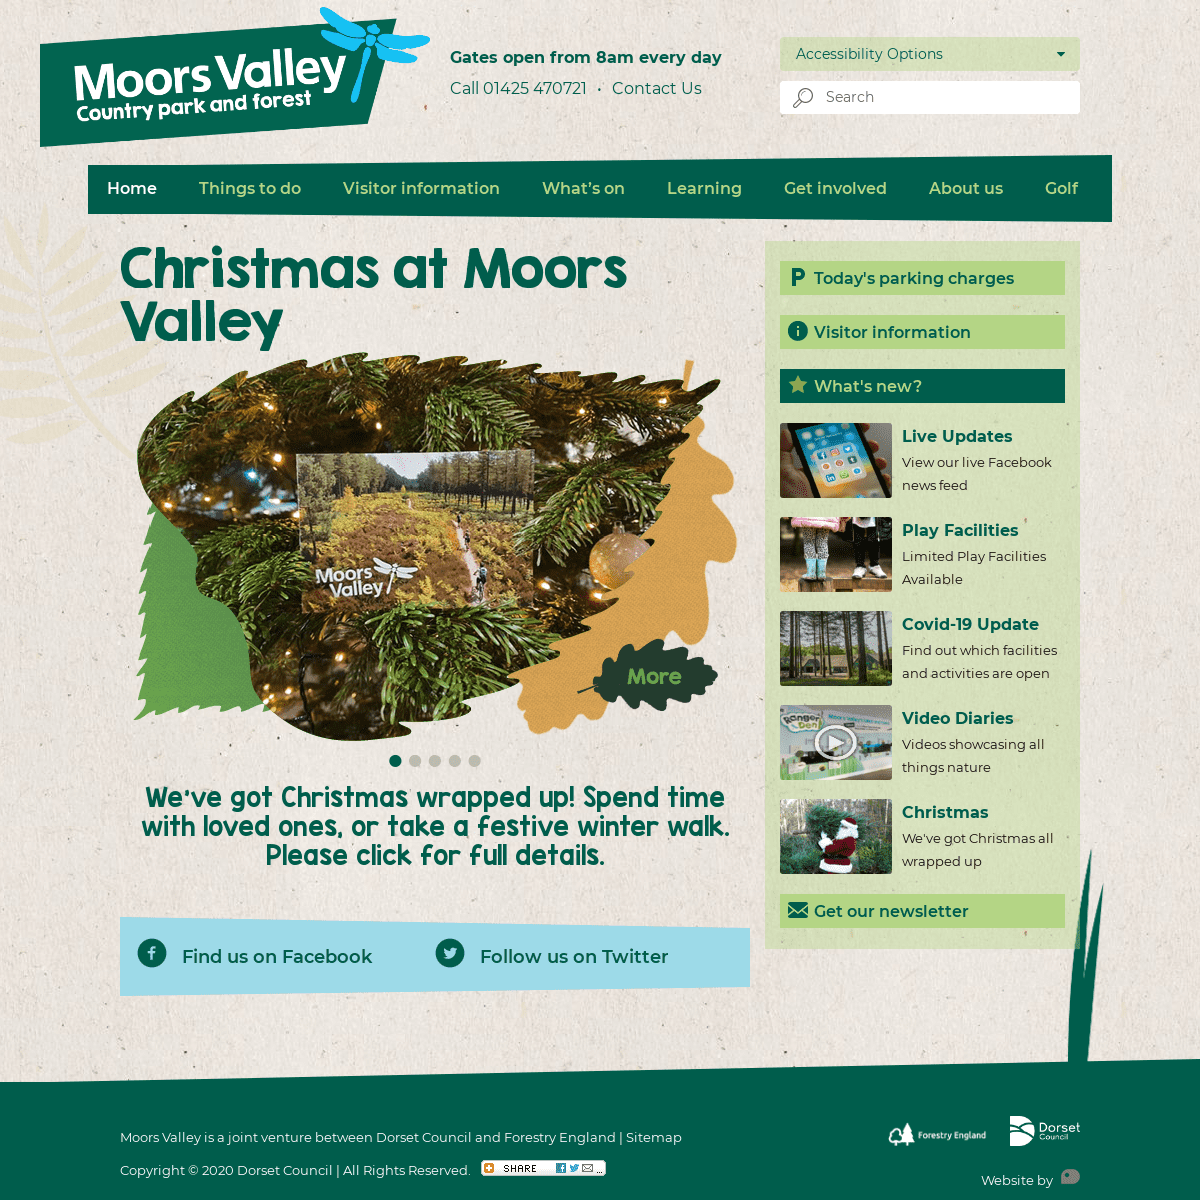 A complete backup of moors-valley.co.uk